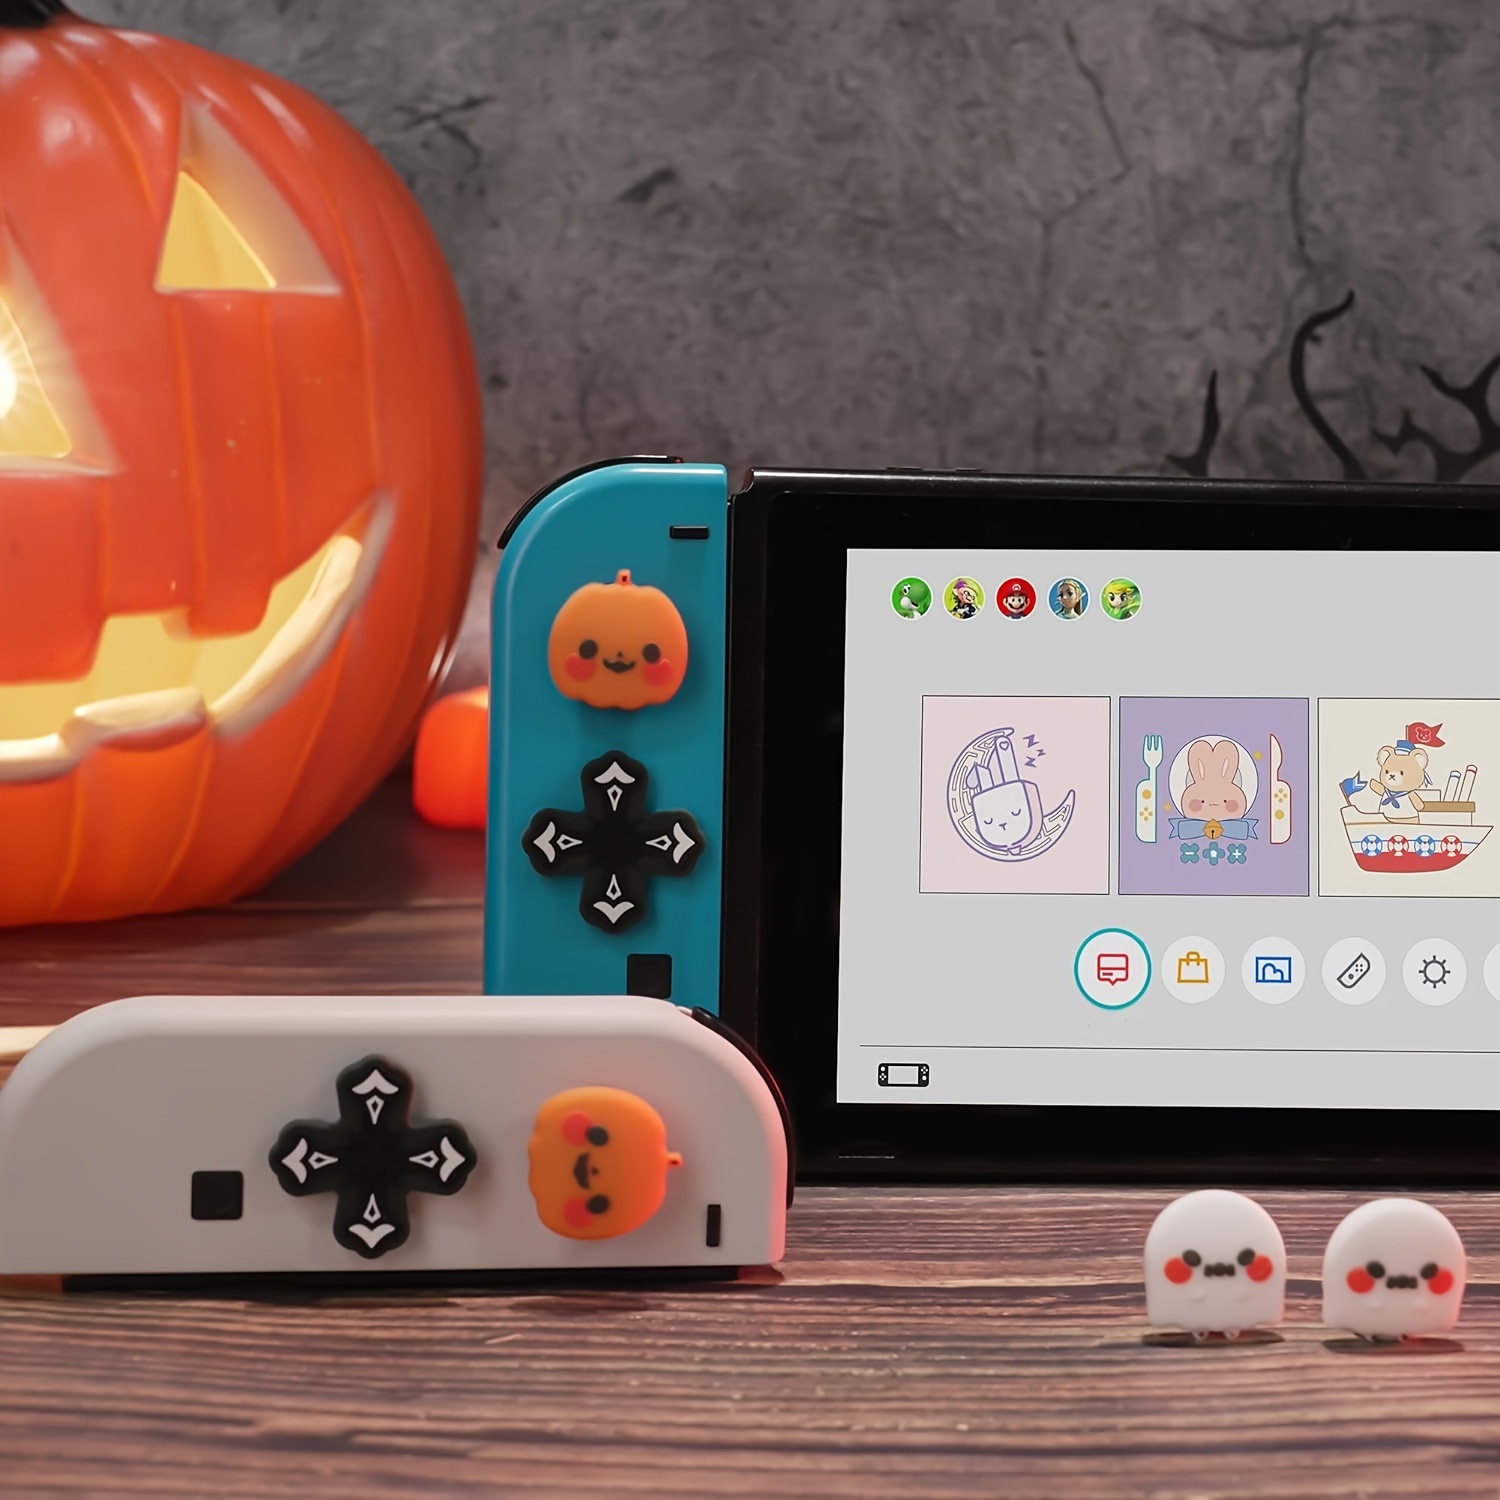 

spooky Fun" Halloween-themed Silicone Button Caps Set Switch/oled - Pumpkin & Ghost Designs, Soft Joystick Covers With Abxy Stickers